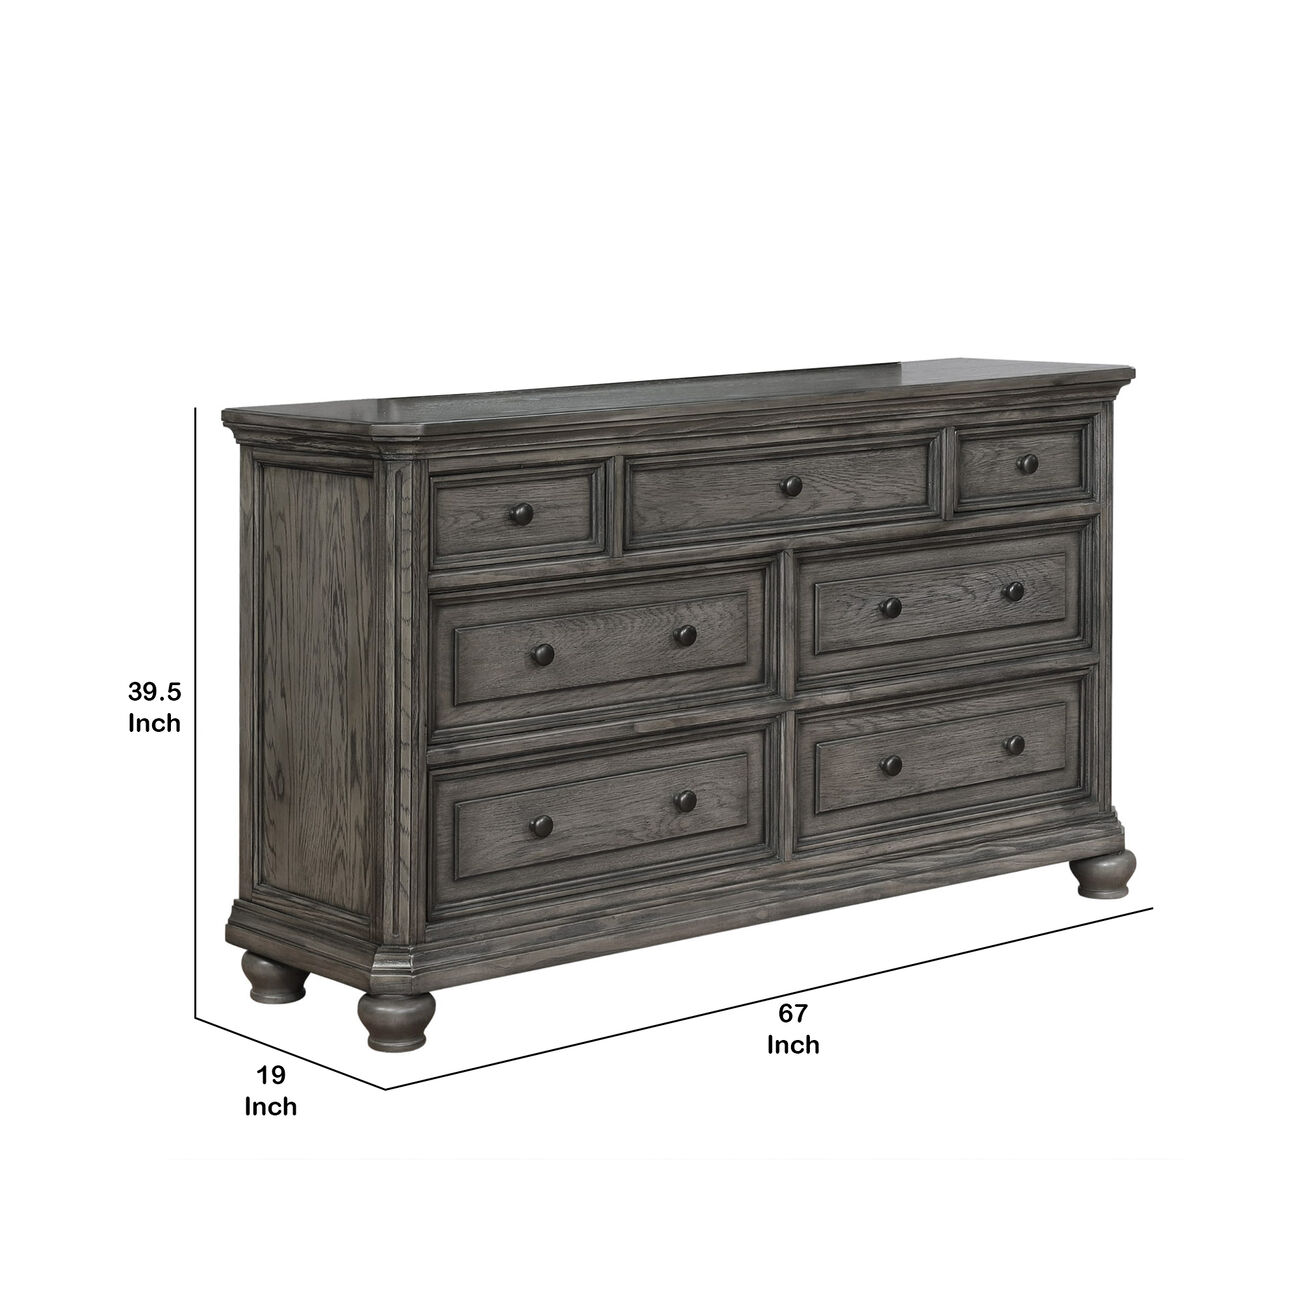 Grained Wooden Frame Dresser with 7 Drawers and Bun Feet, Gray